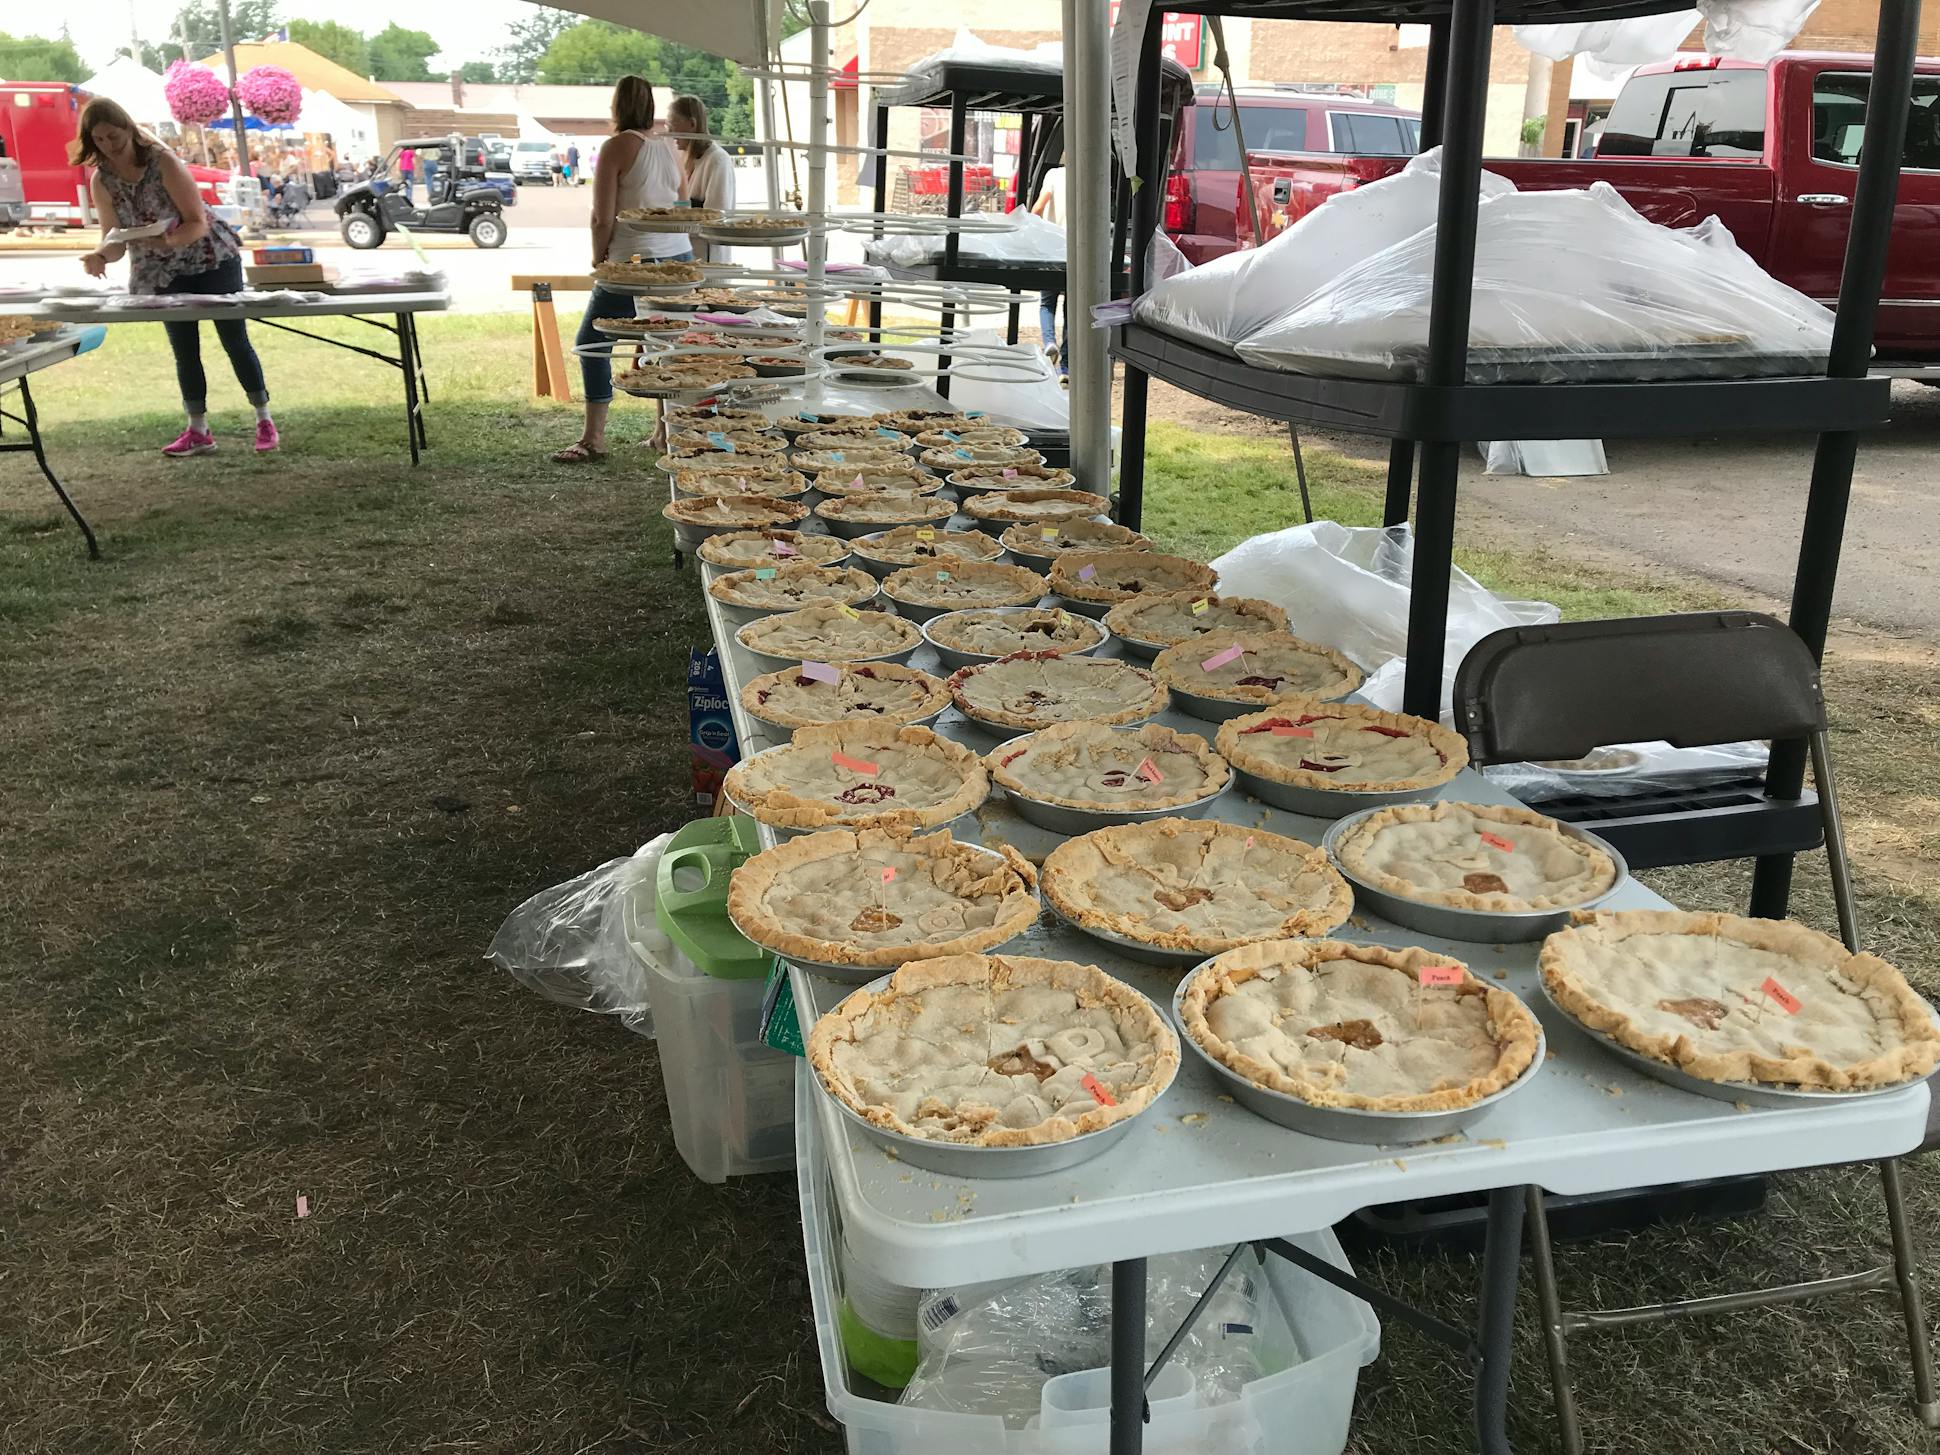 Just a few of the pies waiting to be consumed at Braham Pie Day.